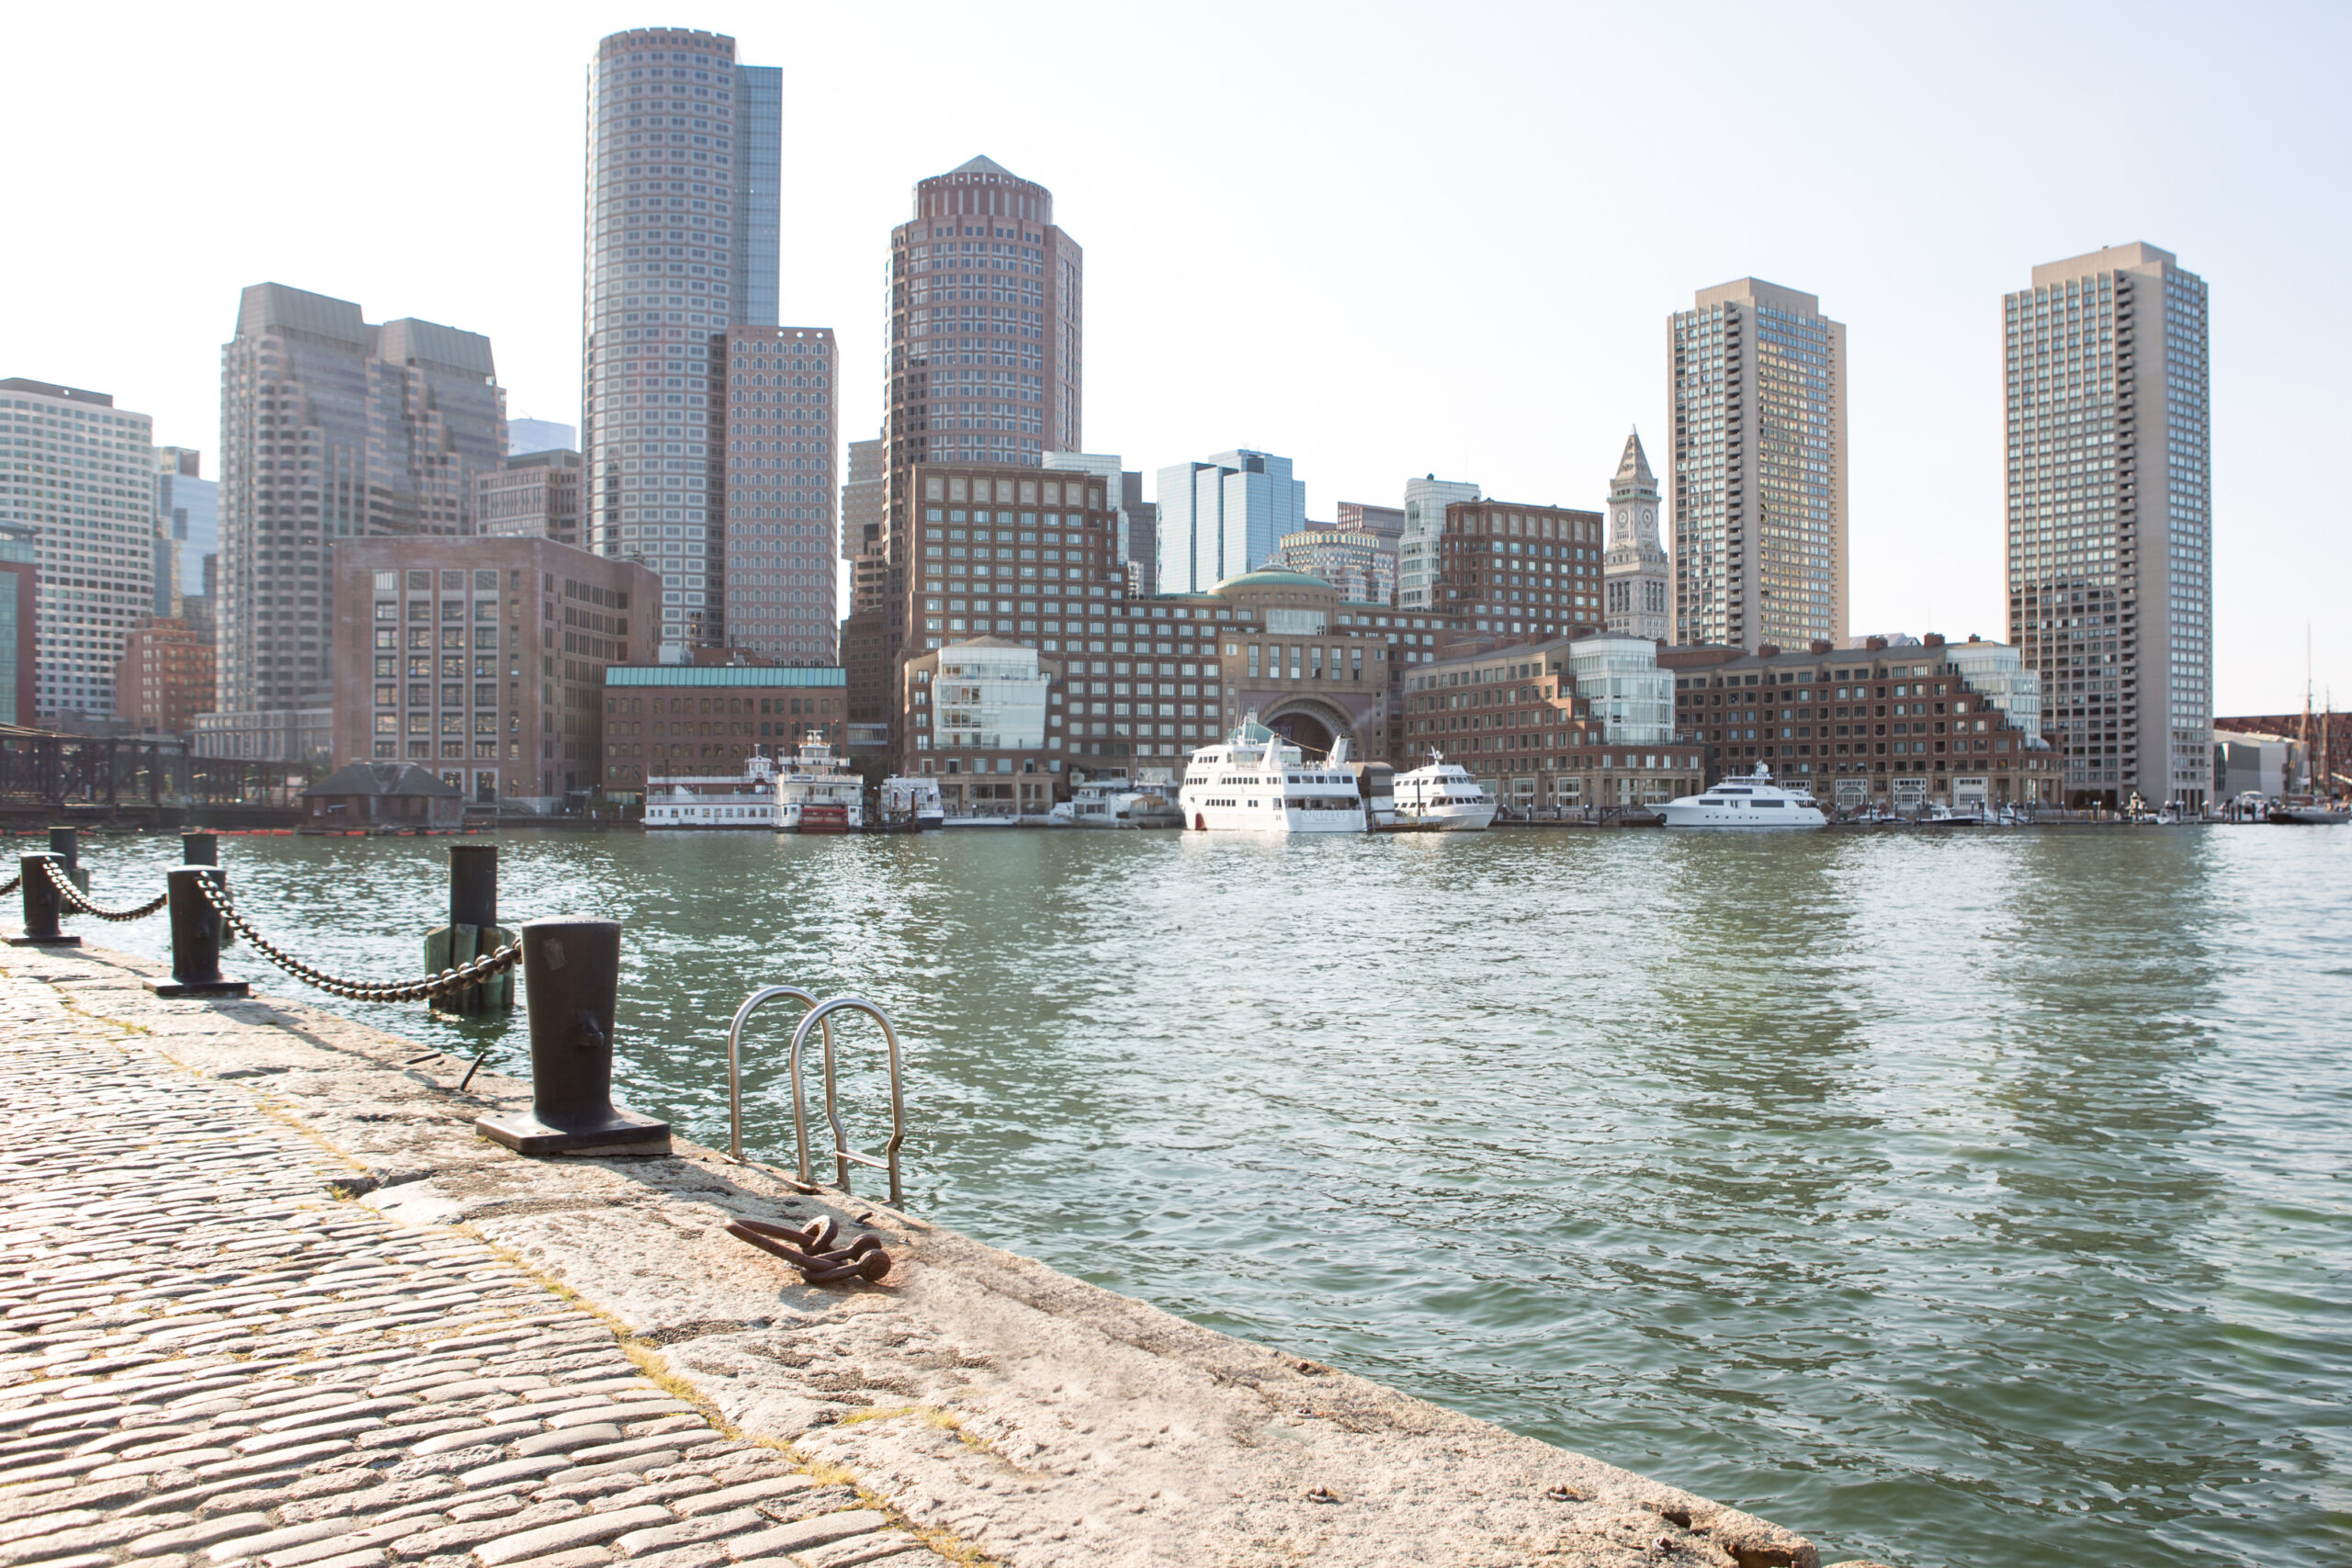 The Boston Harbor Hotel overlooks the waterfront of the Boston Seaport District.